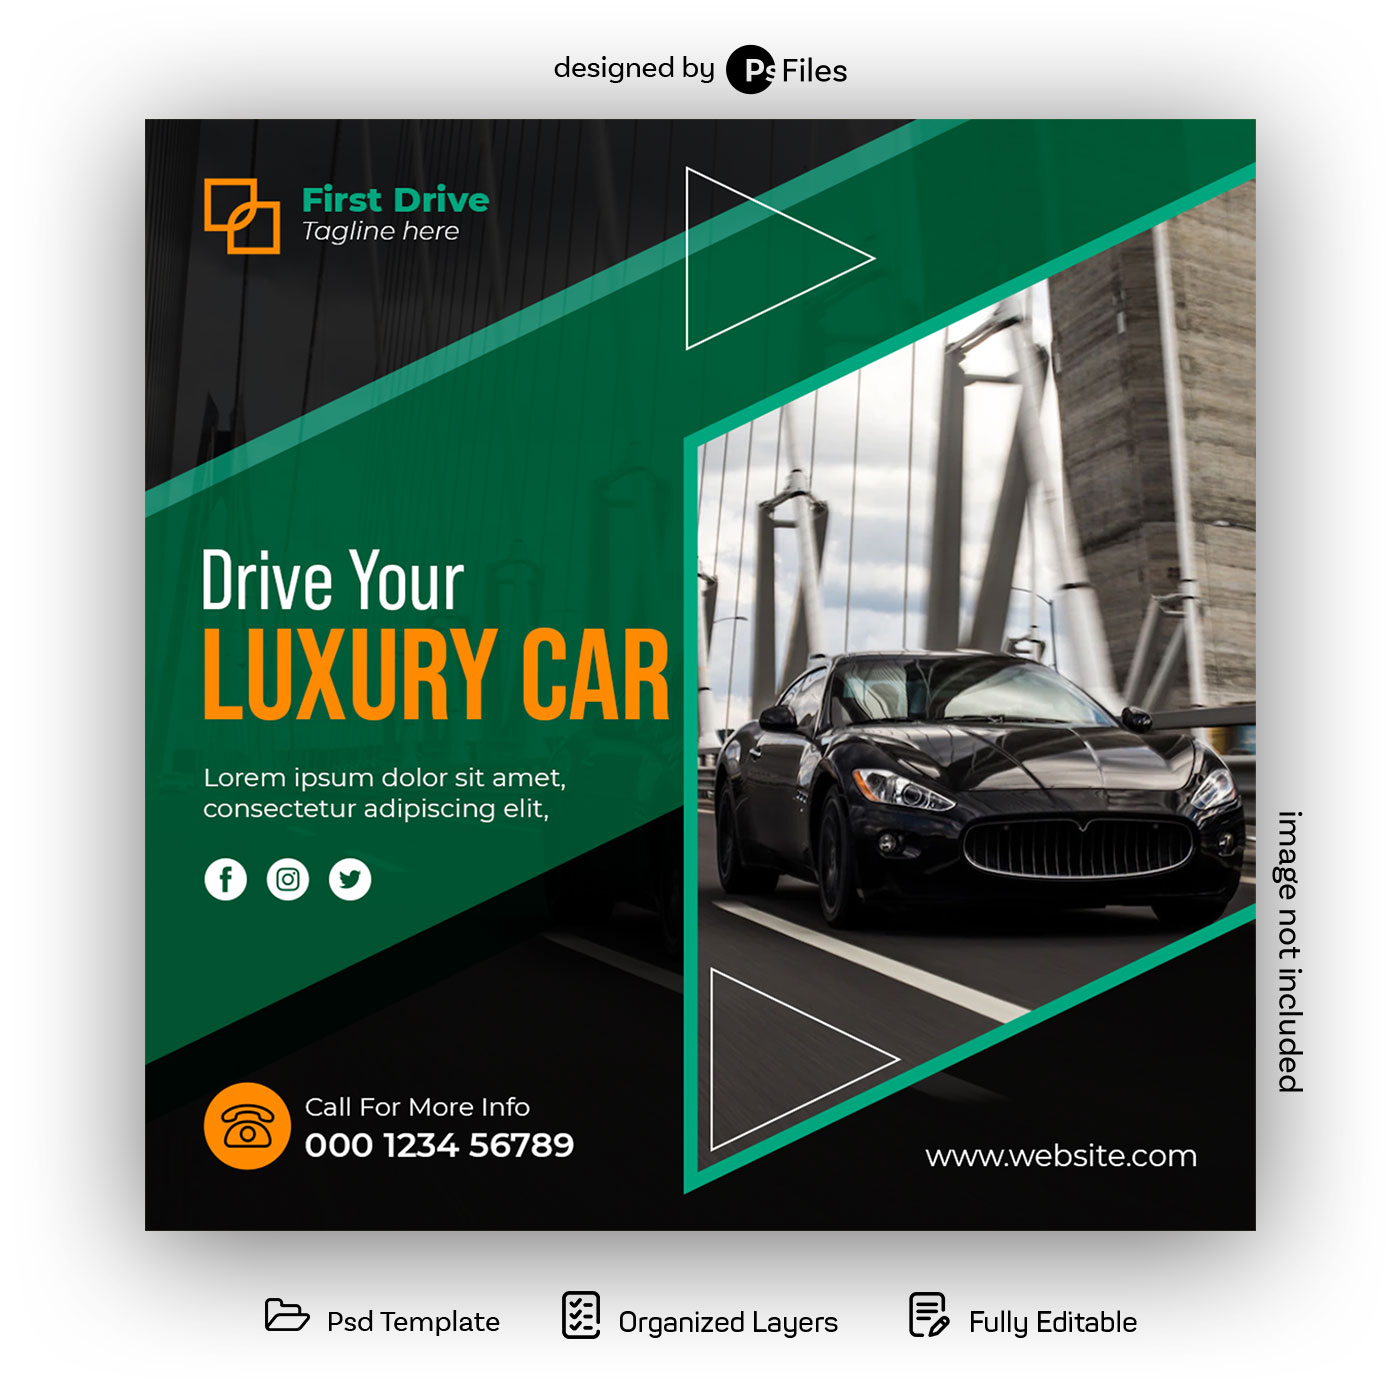 Free Instagram Post Design PSD Template for Luxury Car Renting